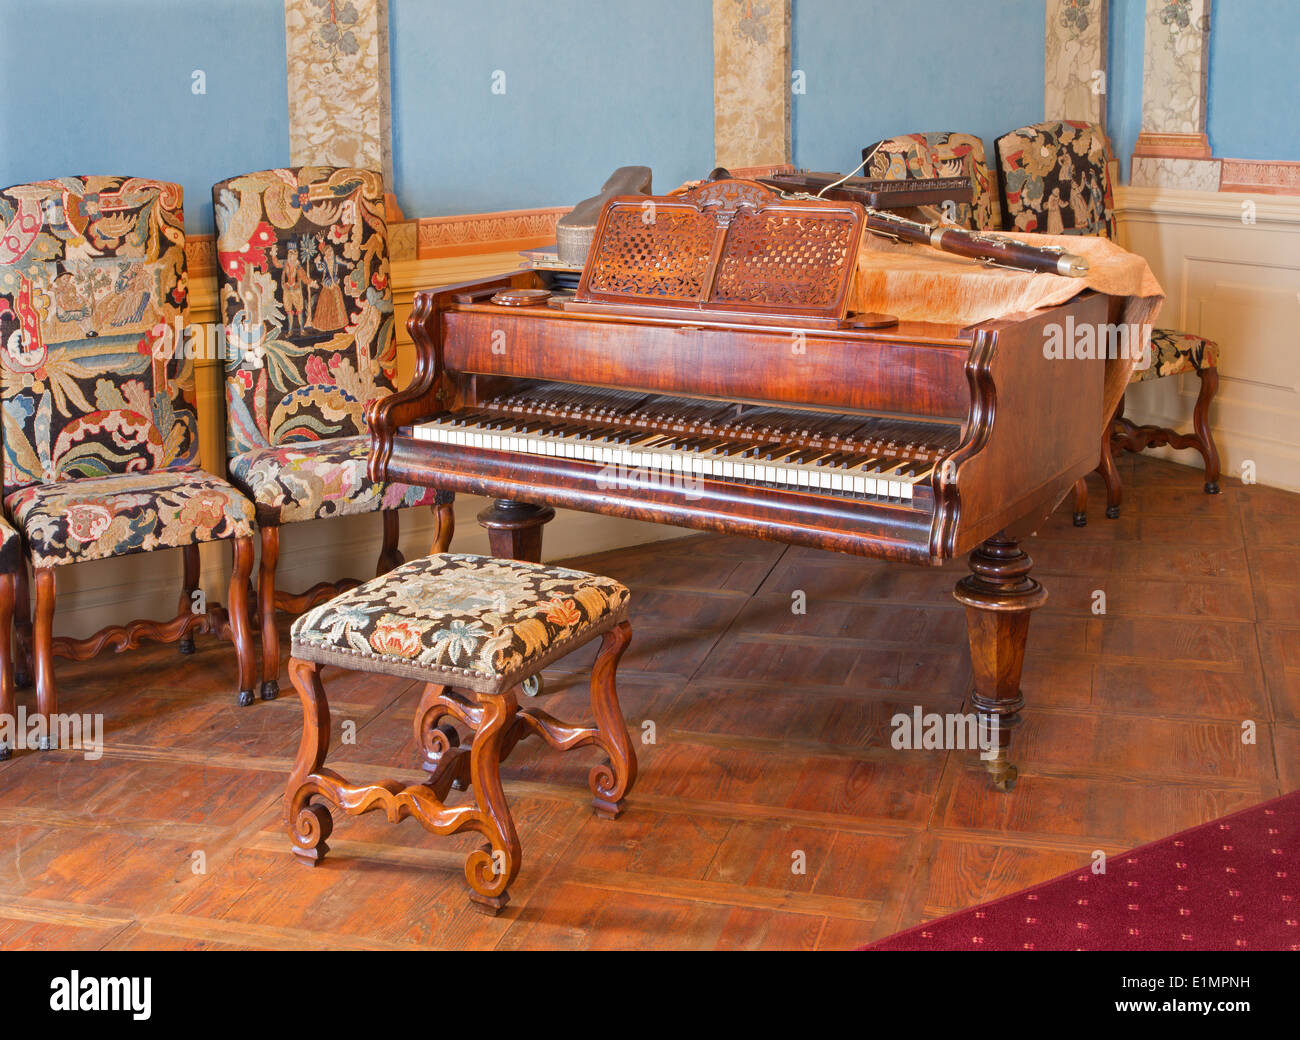 Piano in music saloon in palace Saint Anton with the handmade needlework on the chairs from 19. cent. Stock Photo